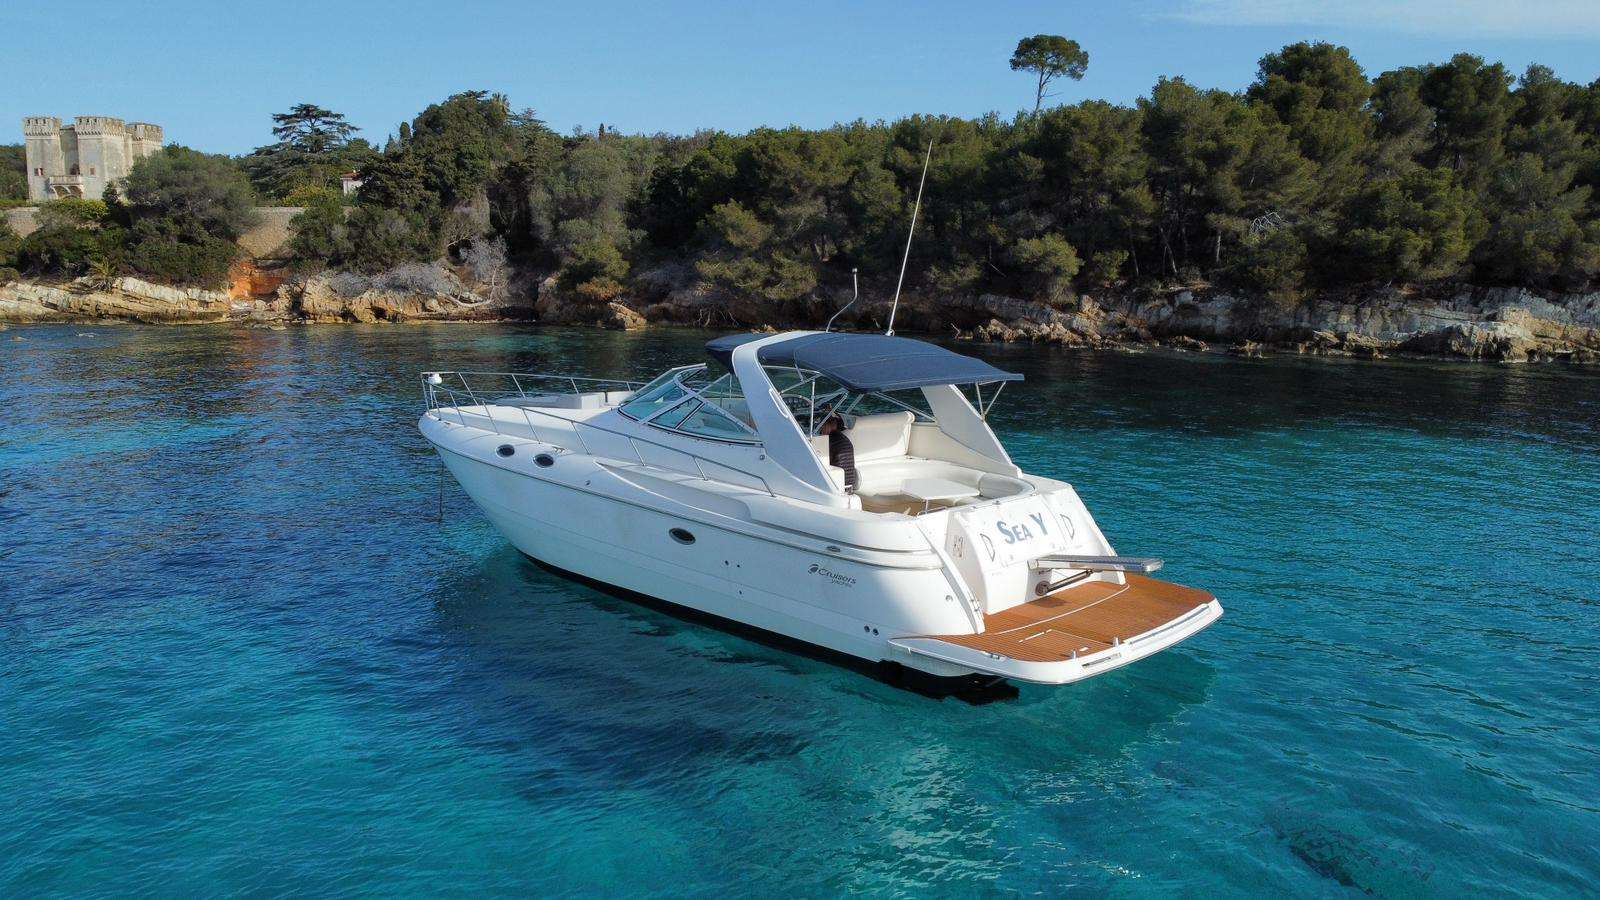 2005 - Yacht Charter Cannes & Boat hire in France French Riviera Cannes Vieux Port de Cannes 2